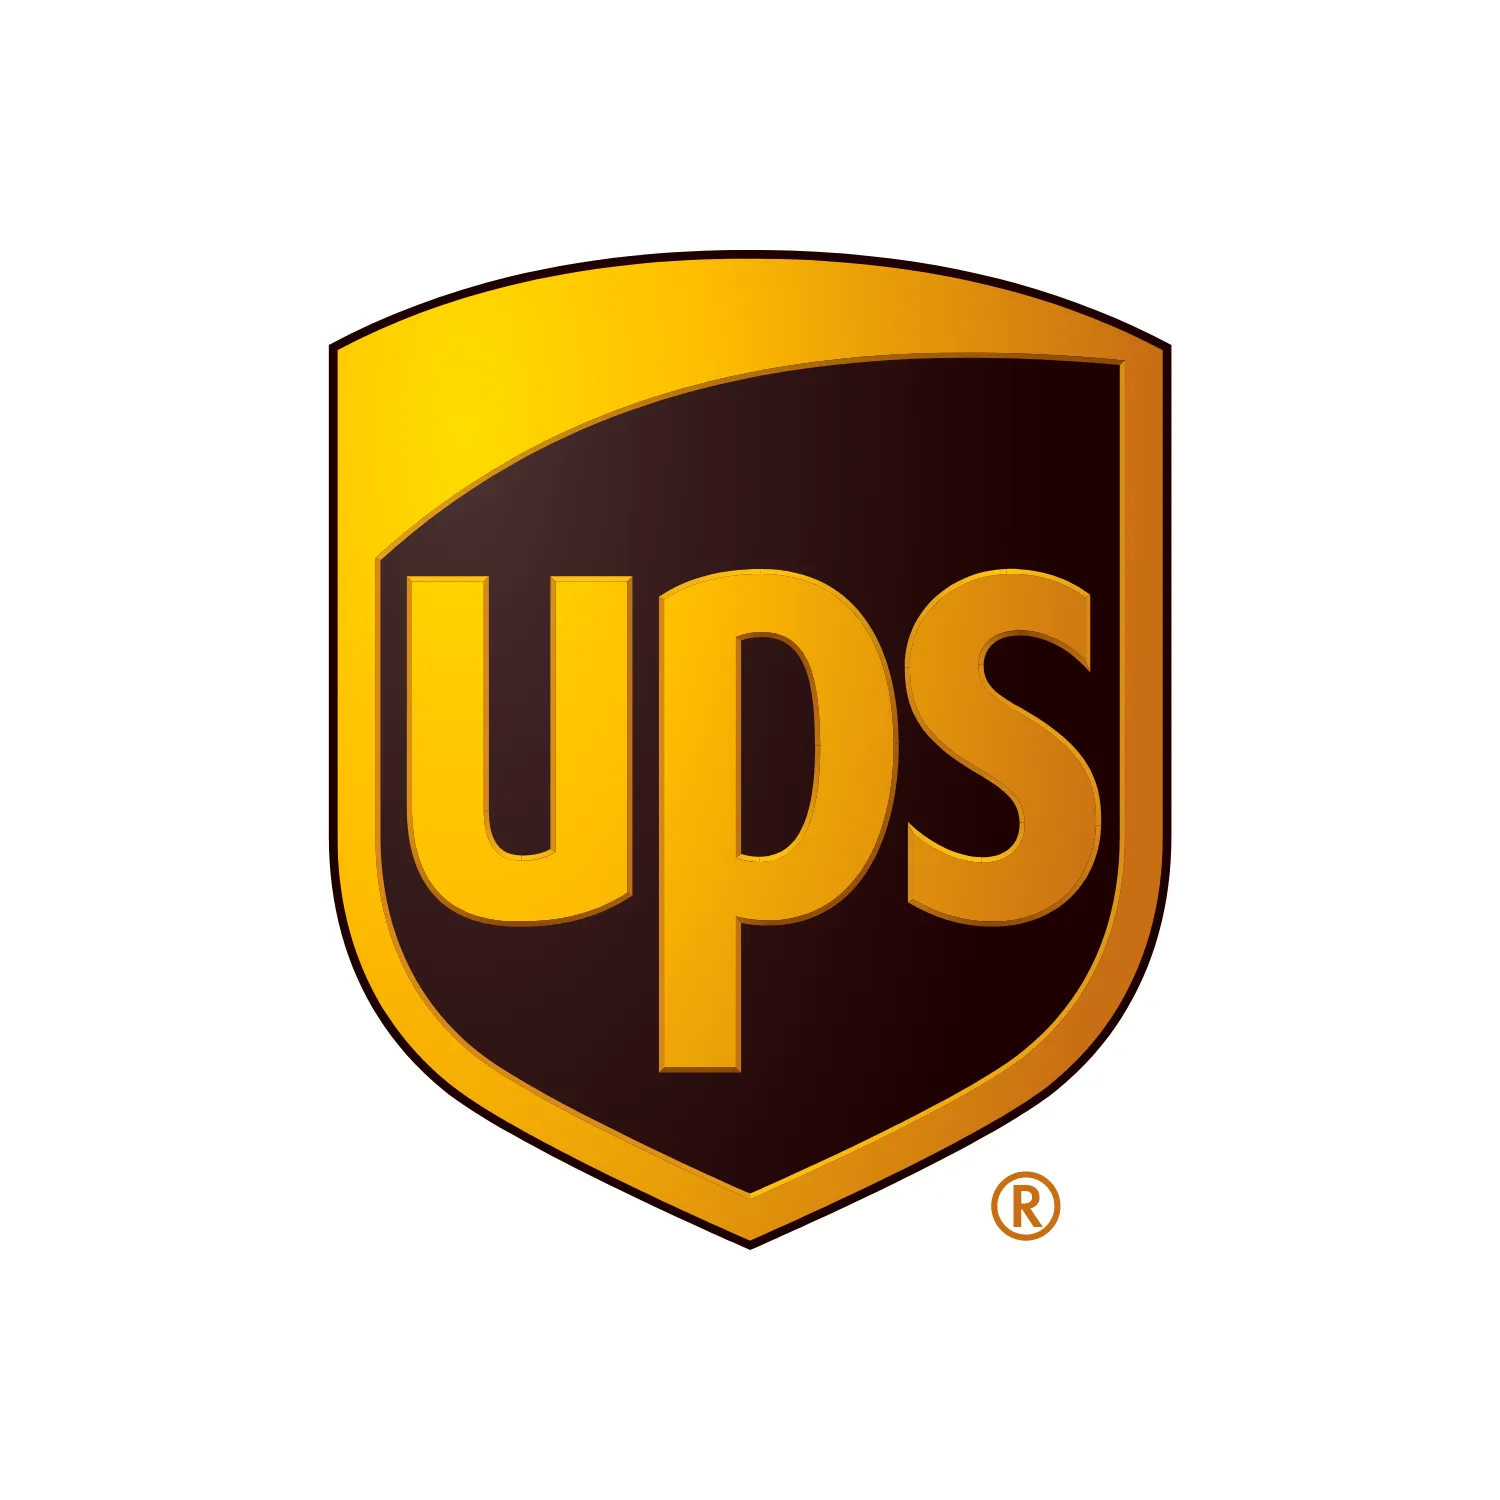 Database of The UPS Store Locations in the United States